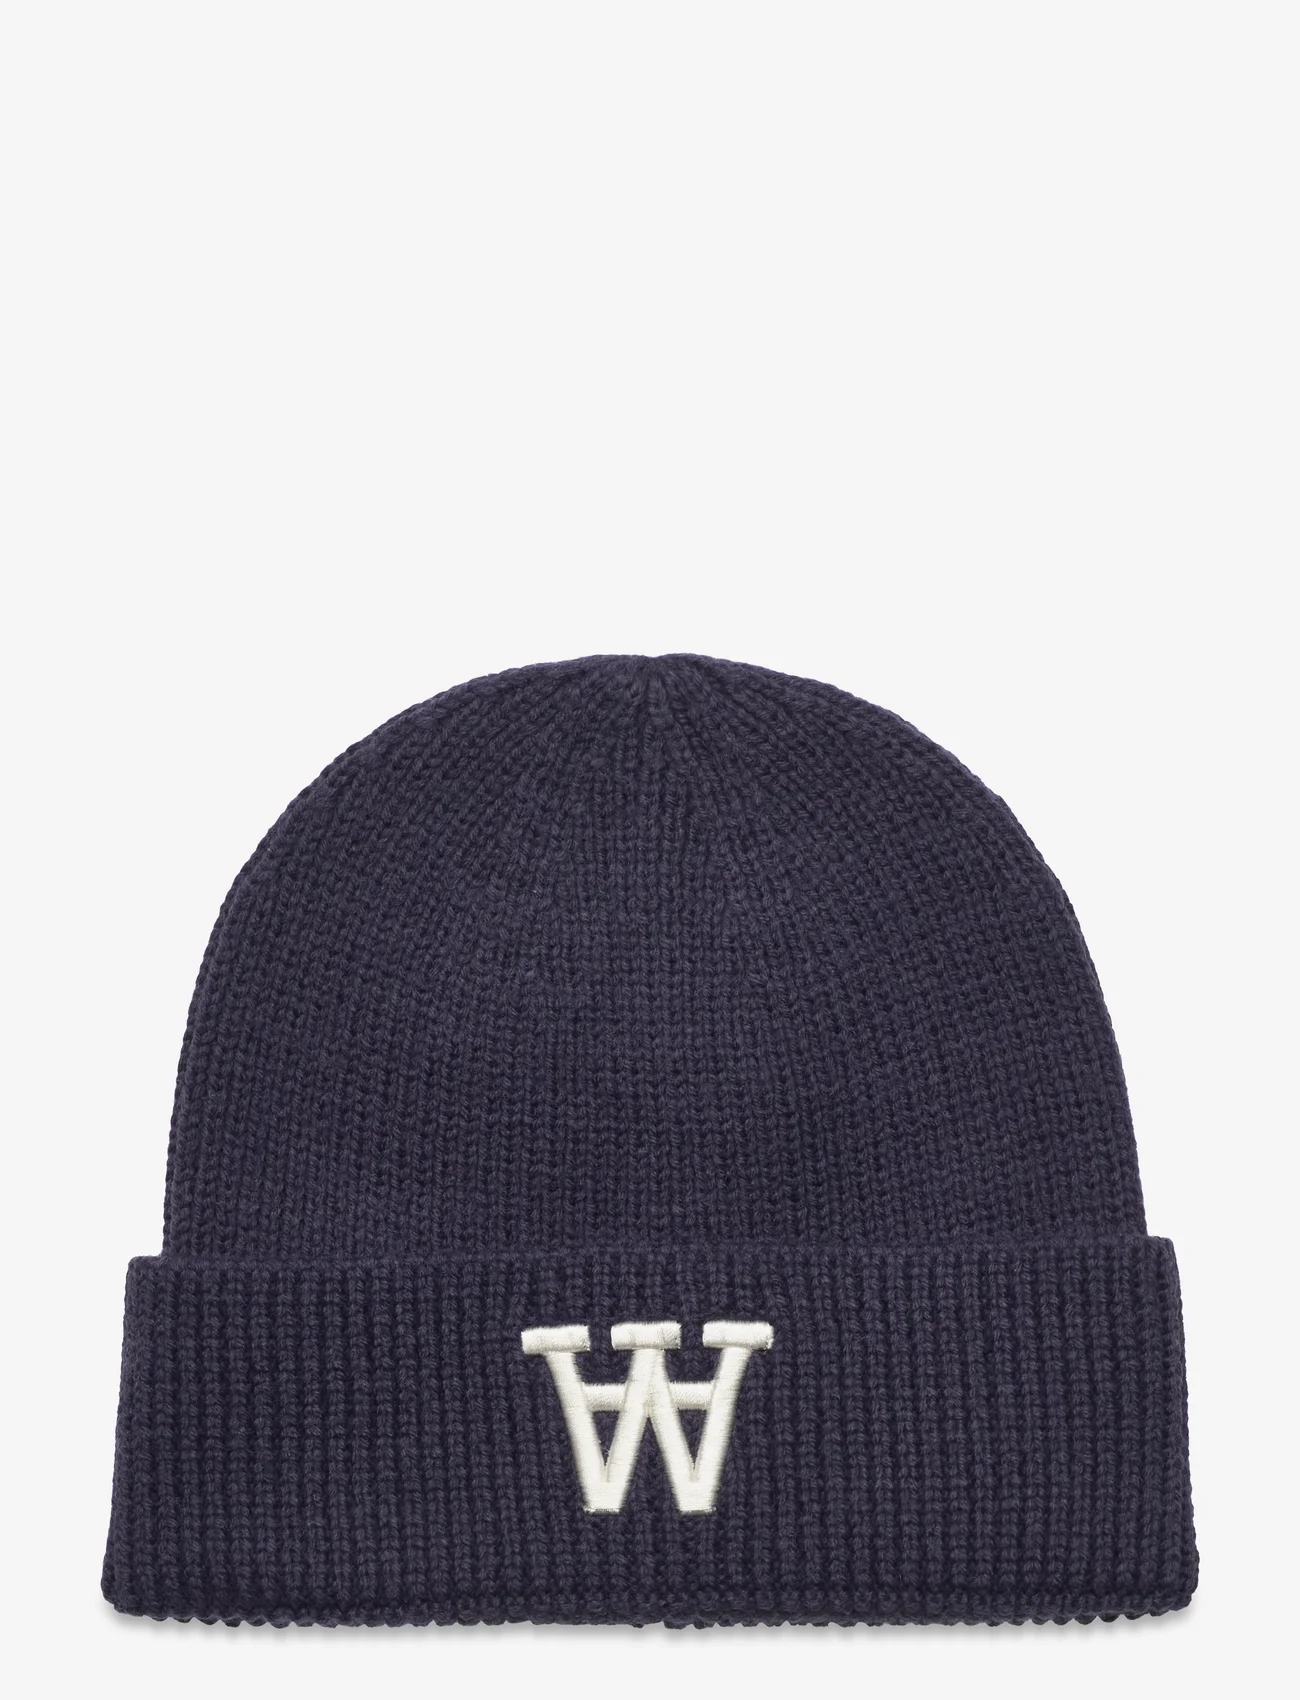 Double A by Wood Wood - Vin logo beanie - beanies - navy - 0